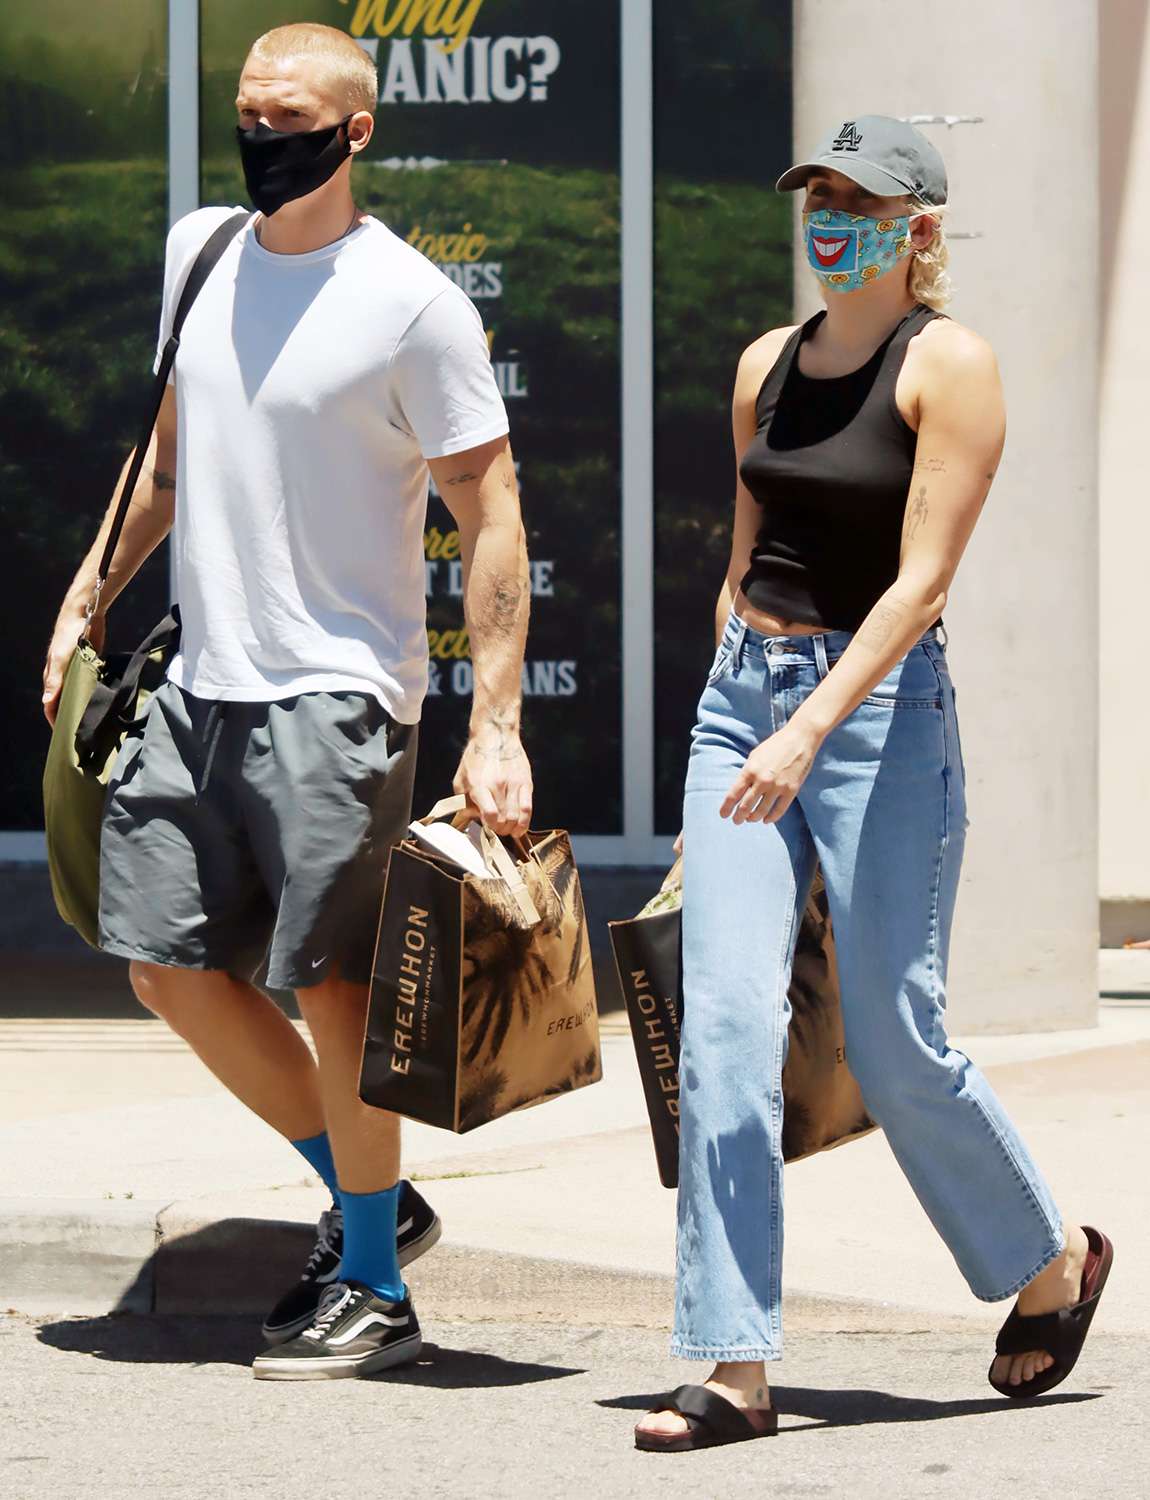 Miley Cyrus and Cody Simpson grab groceries together